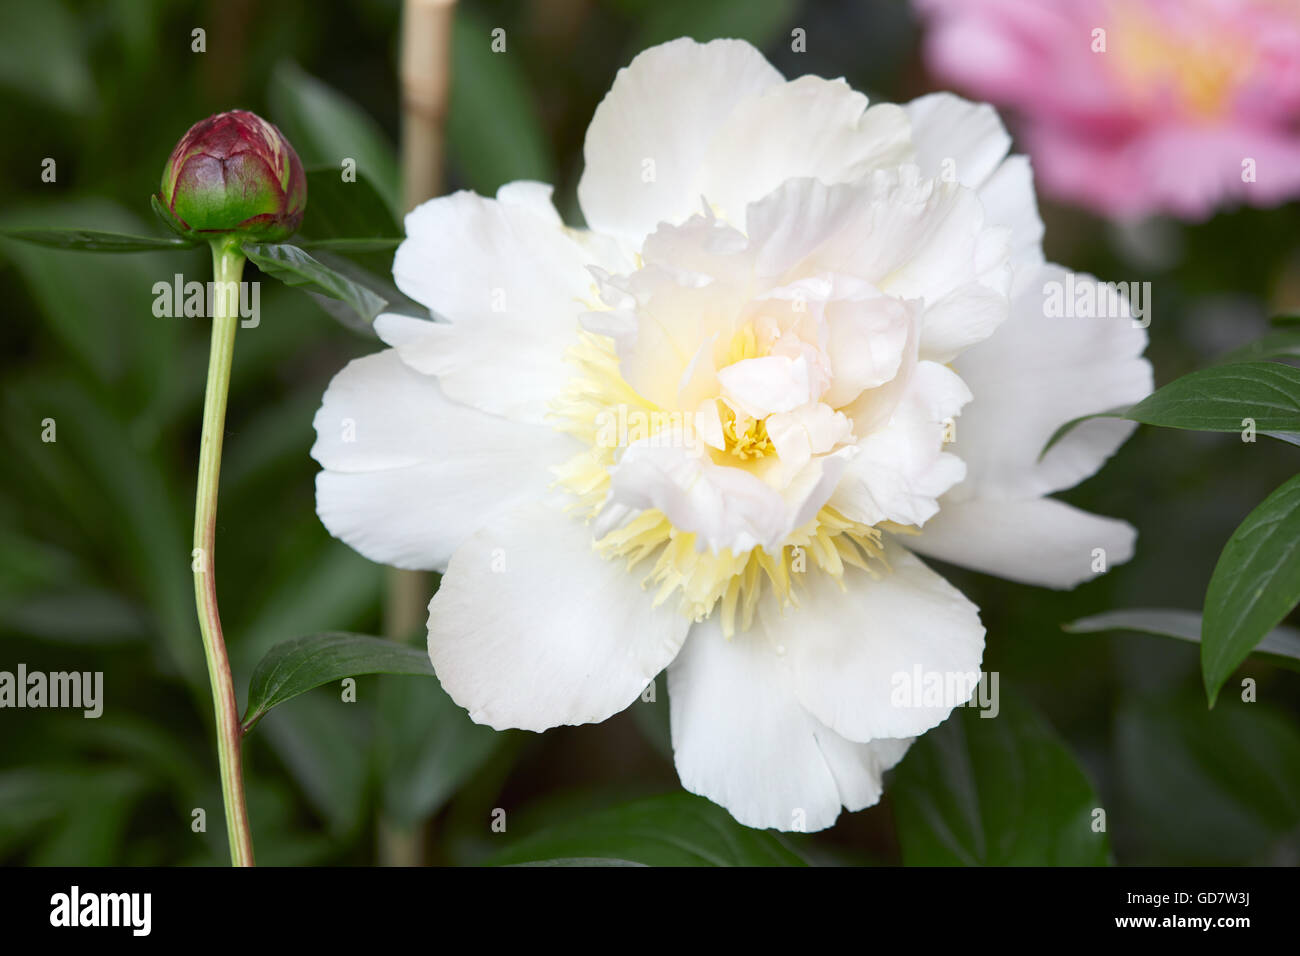 White peony flower and bud on green leaves background Stock Photo